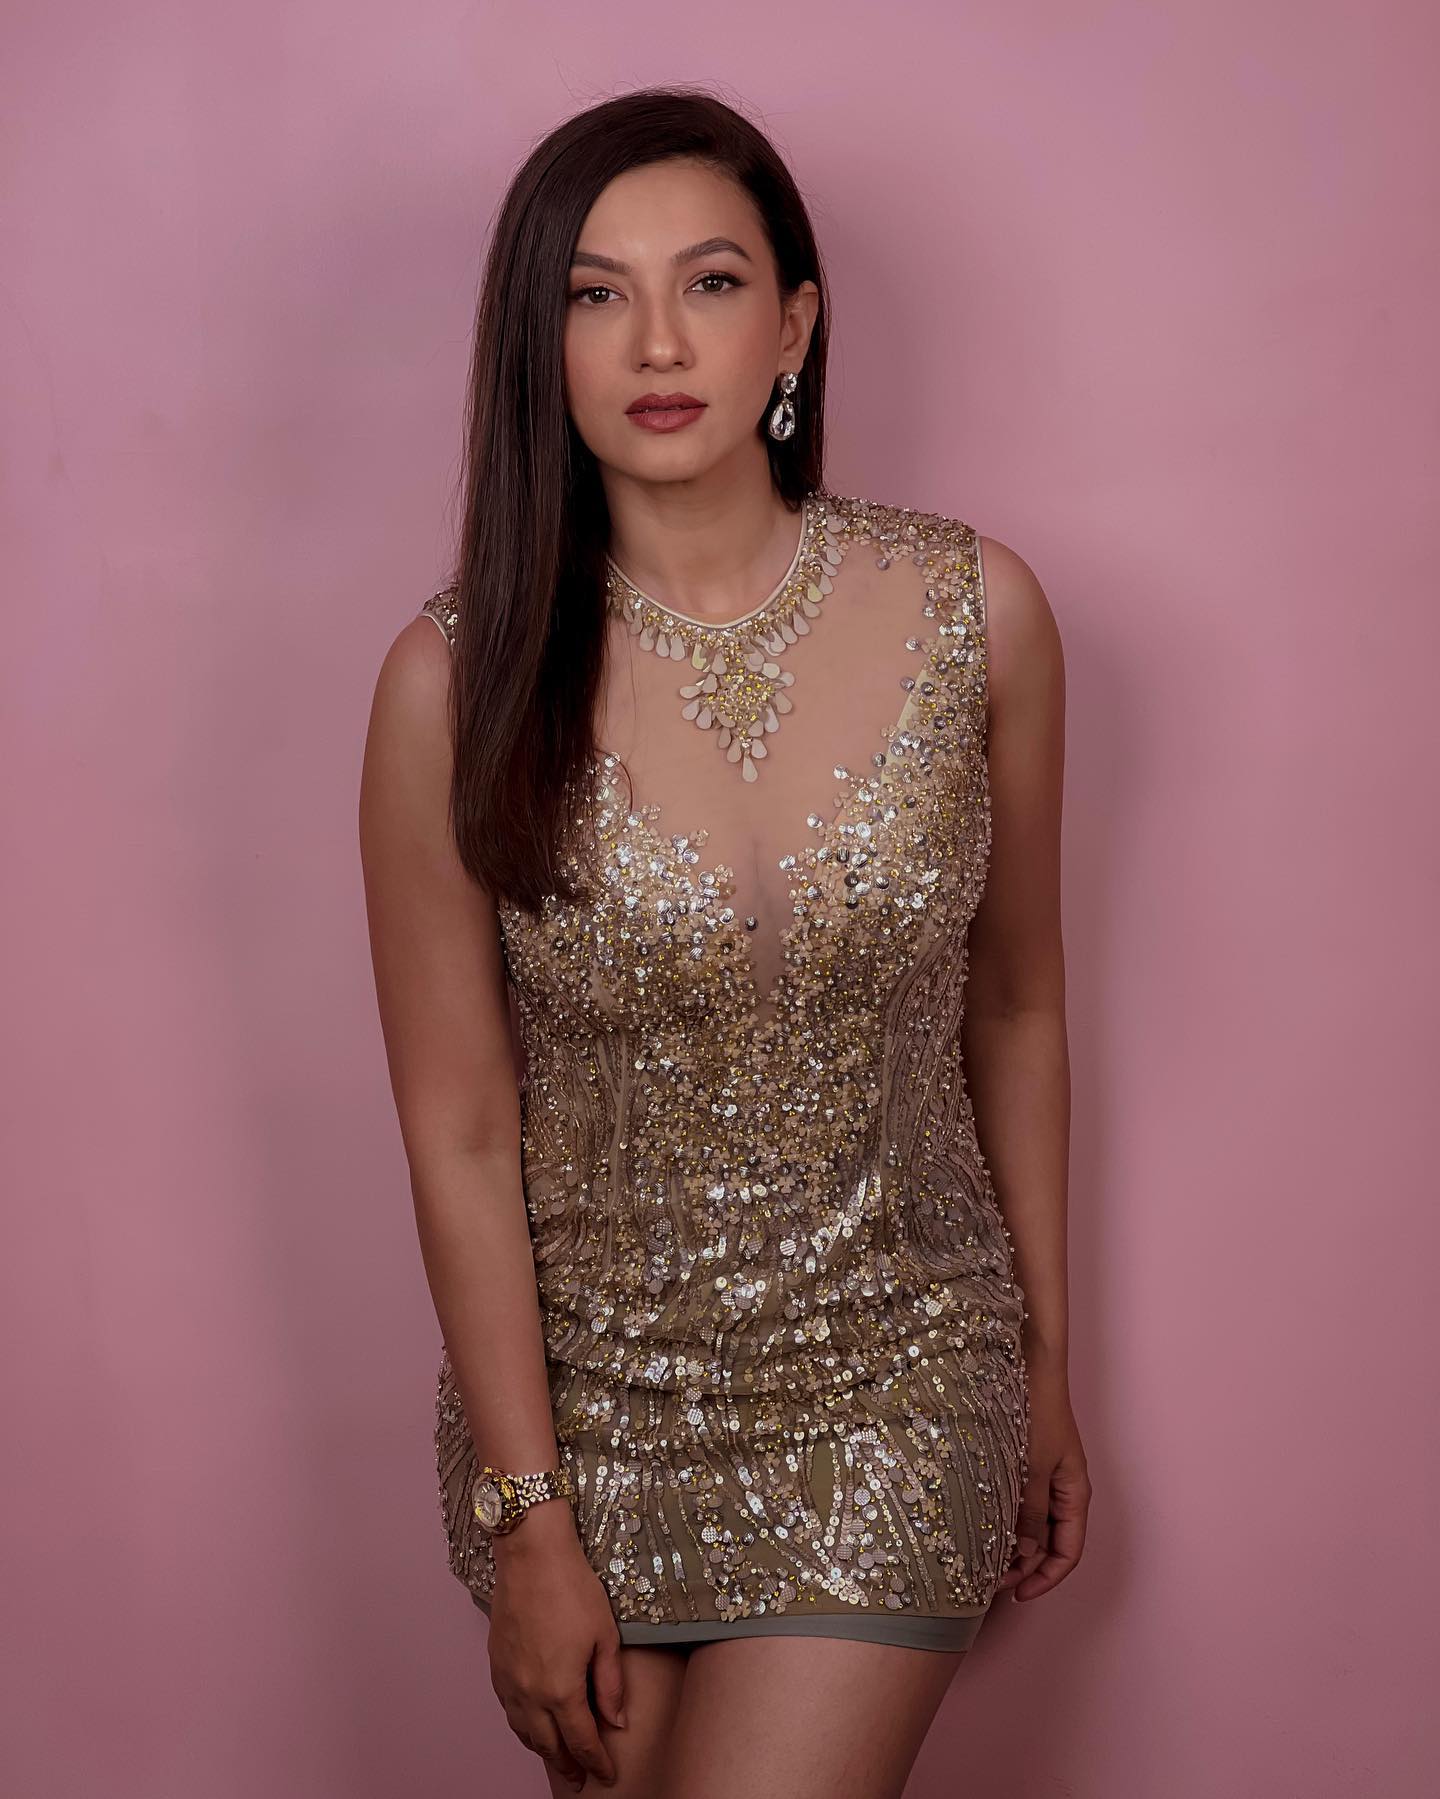 Exclusive! Gauahar Khan: ‘I Was A Current Actor Of The Film Industry ...